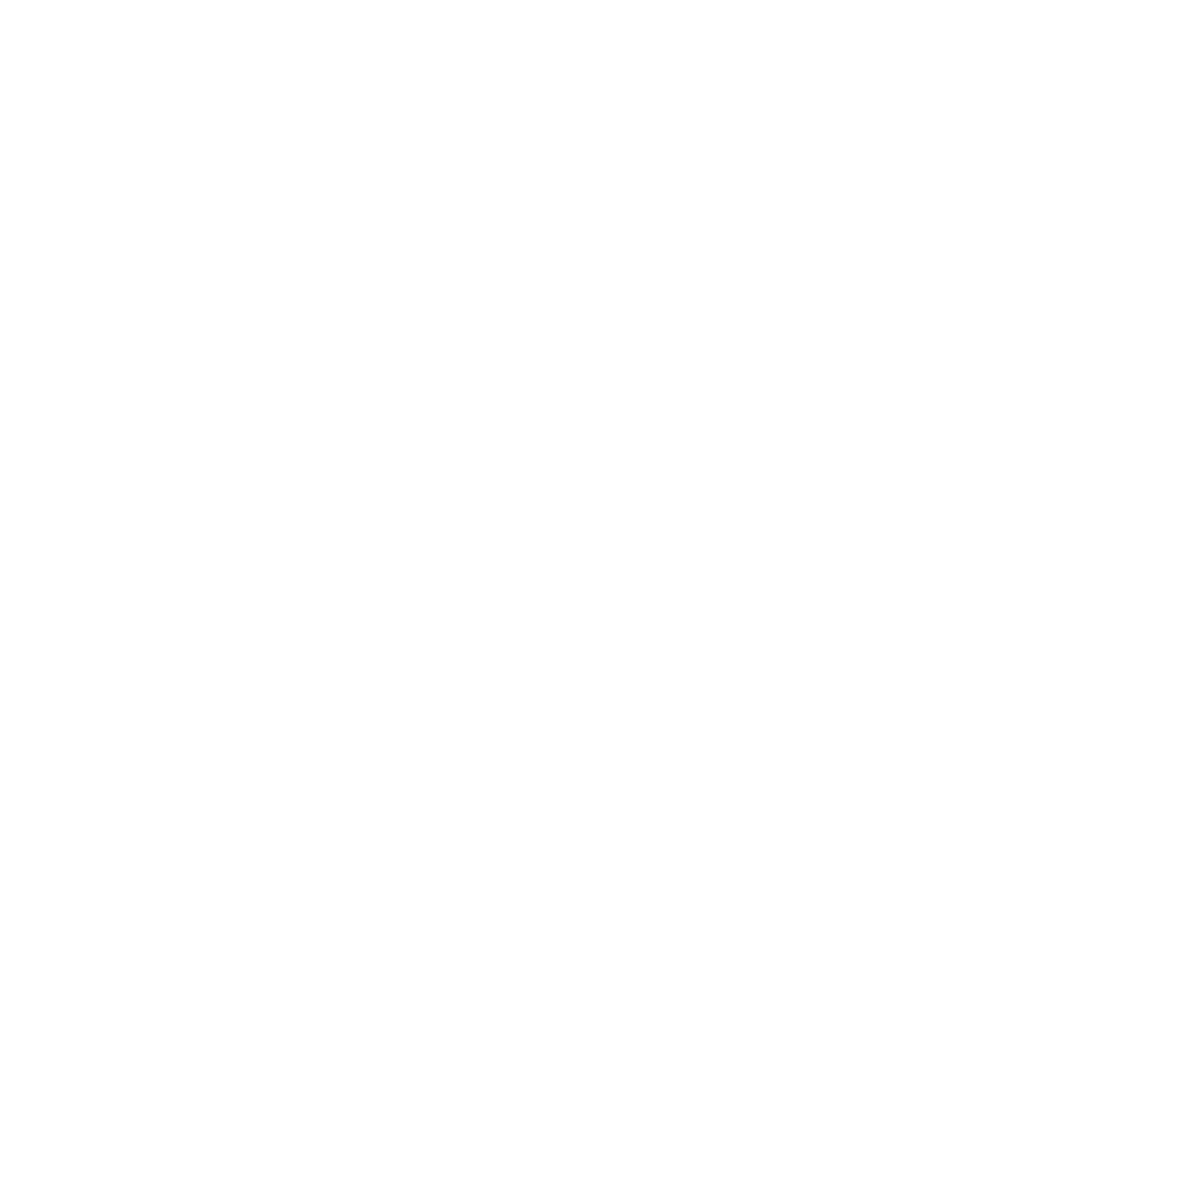 An icon of a plant growing in someone's hand